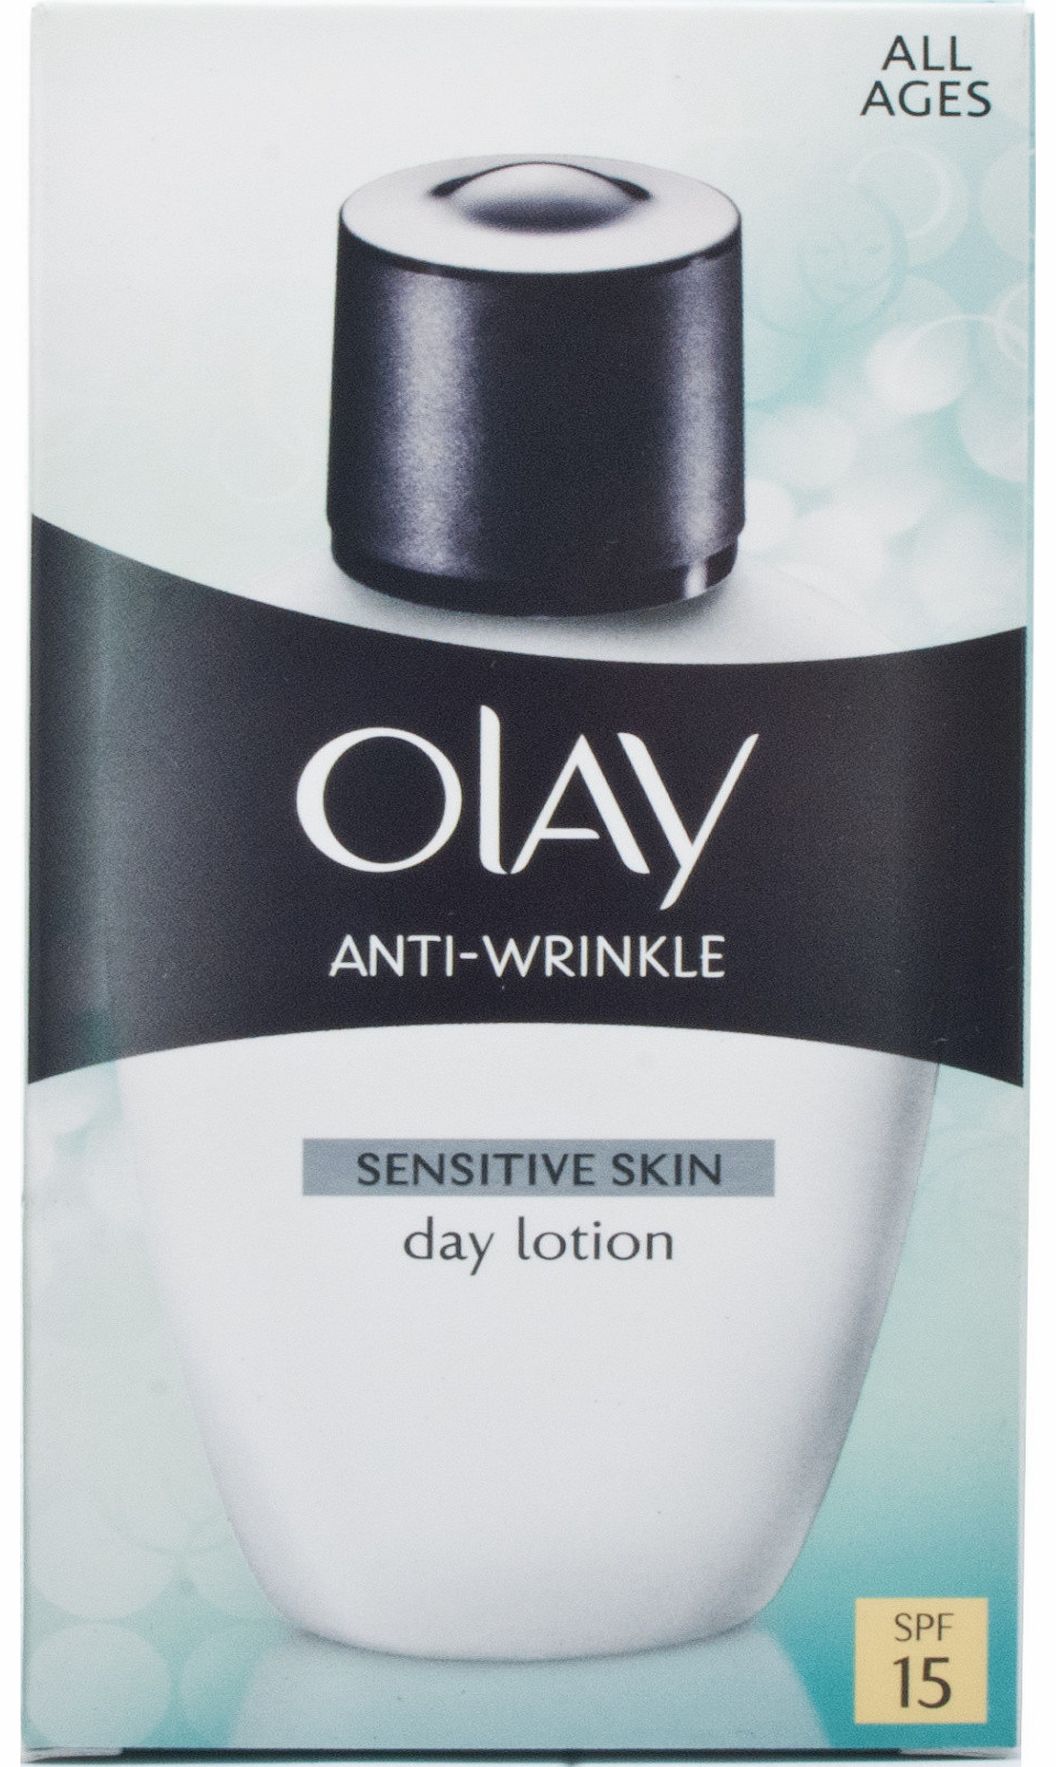 Olay Anti-Wrinkle Sensitive Day Lotion